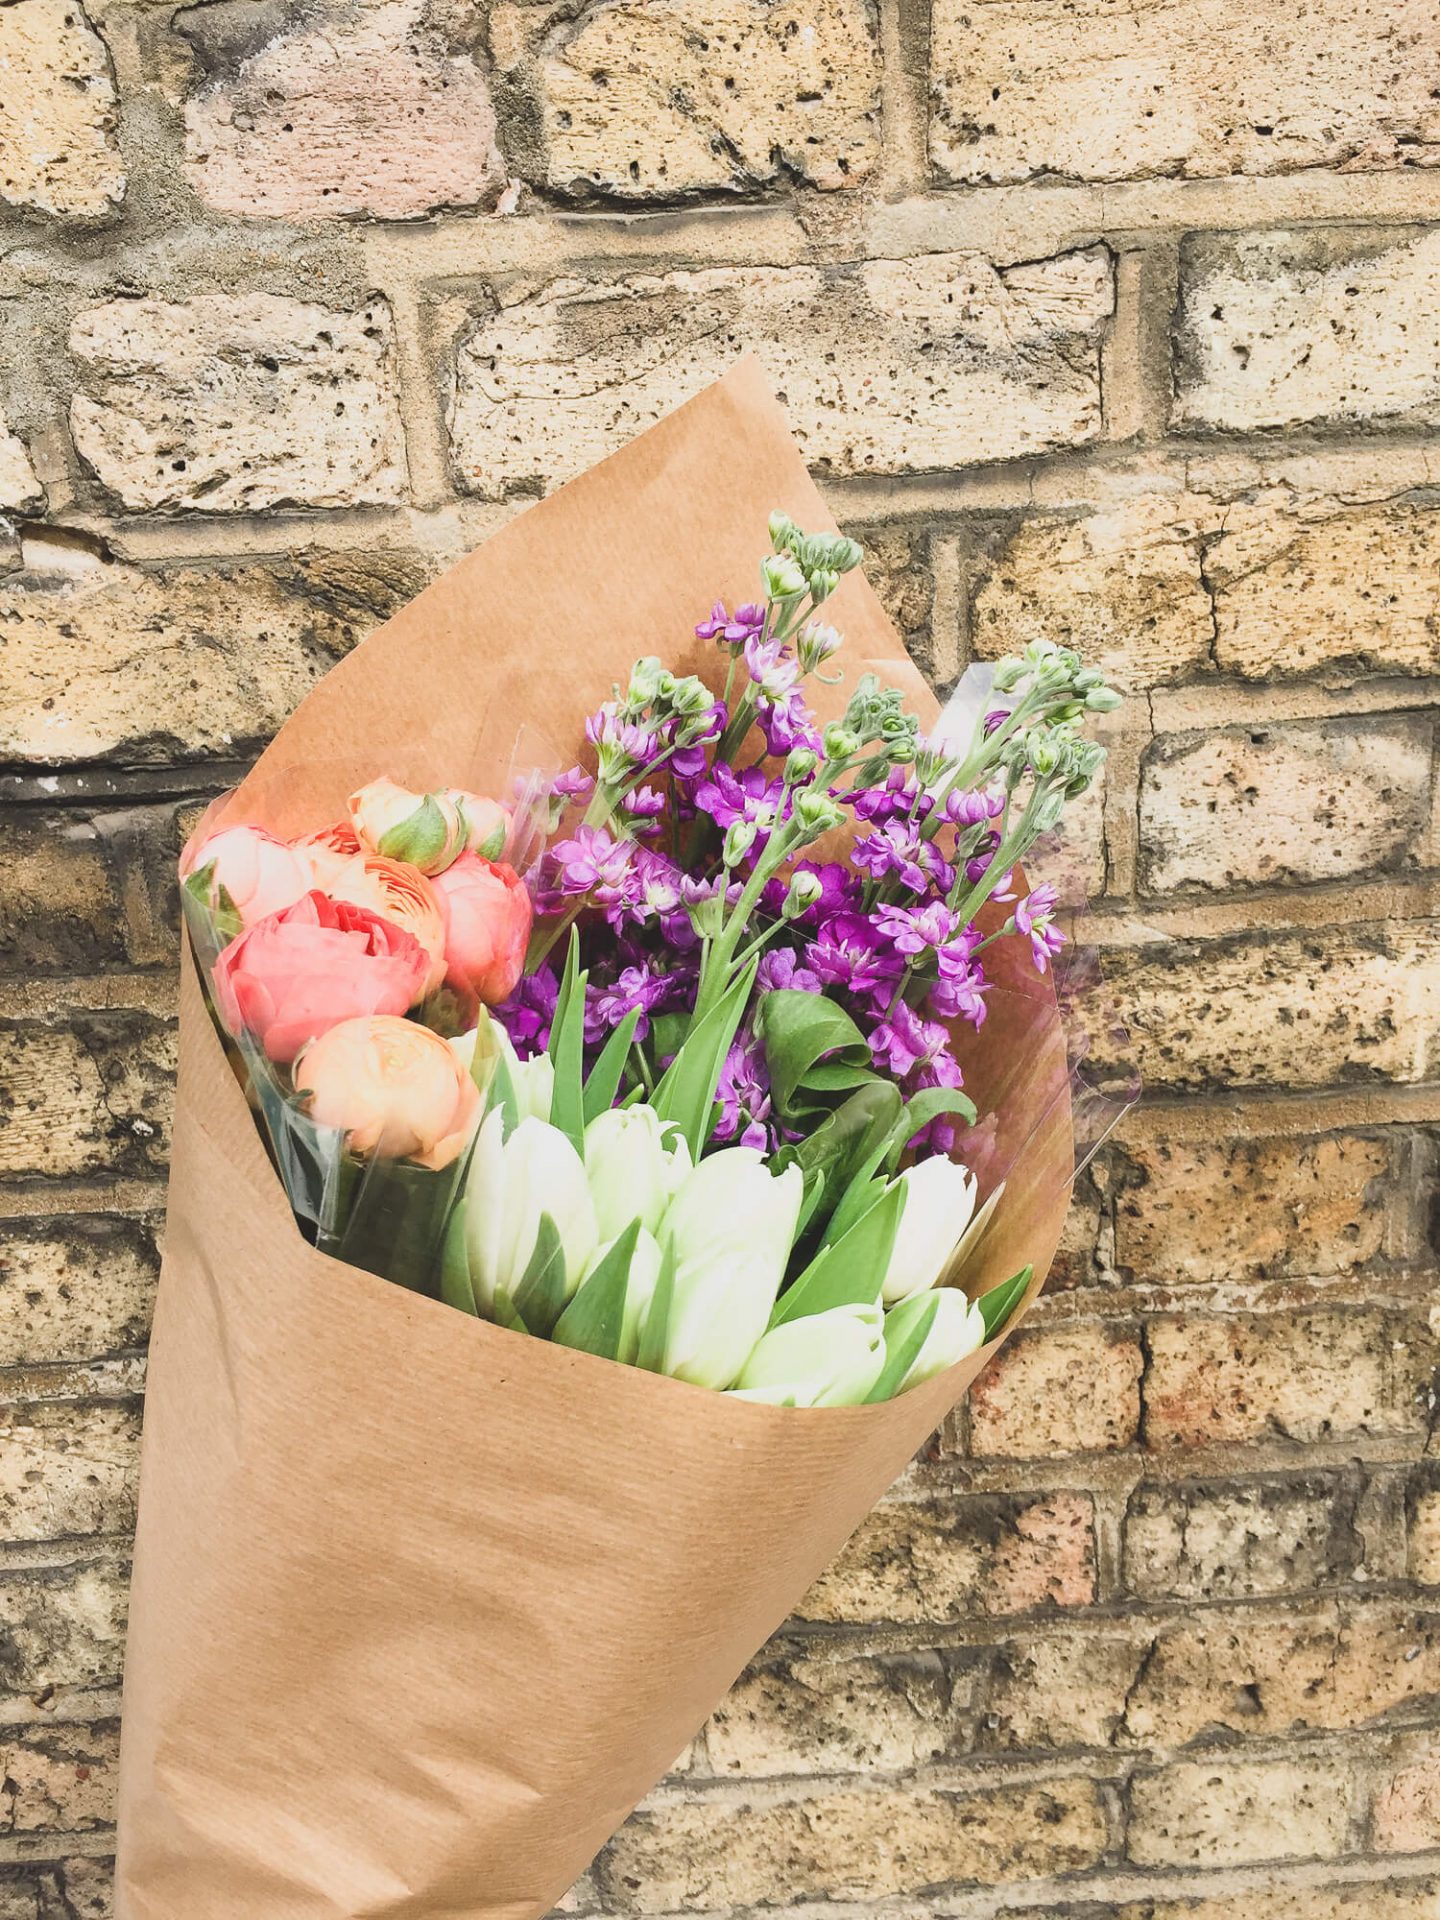 Want ideas for what to do in London on a Sunday? Get tips for Columbia Road Flower Market in East London! www.dalton-banks.co.uk